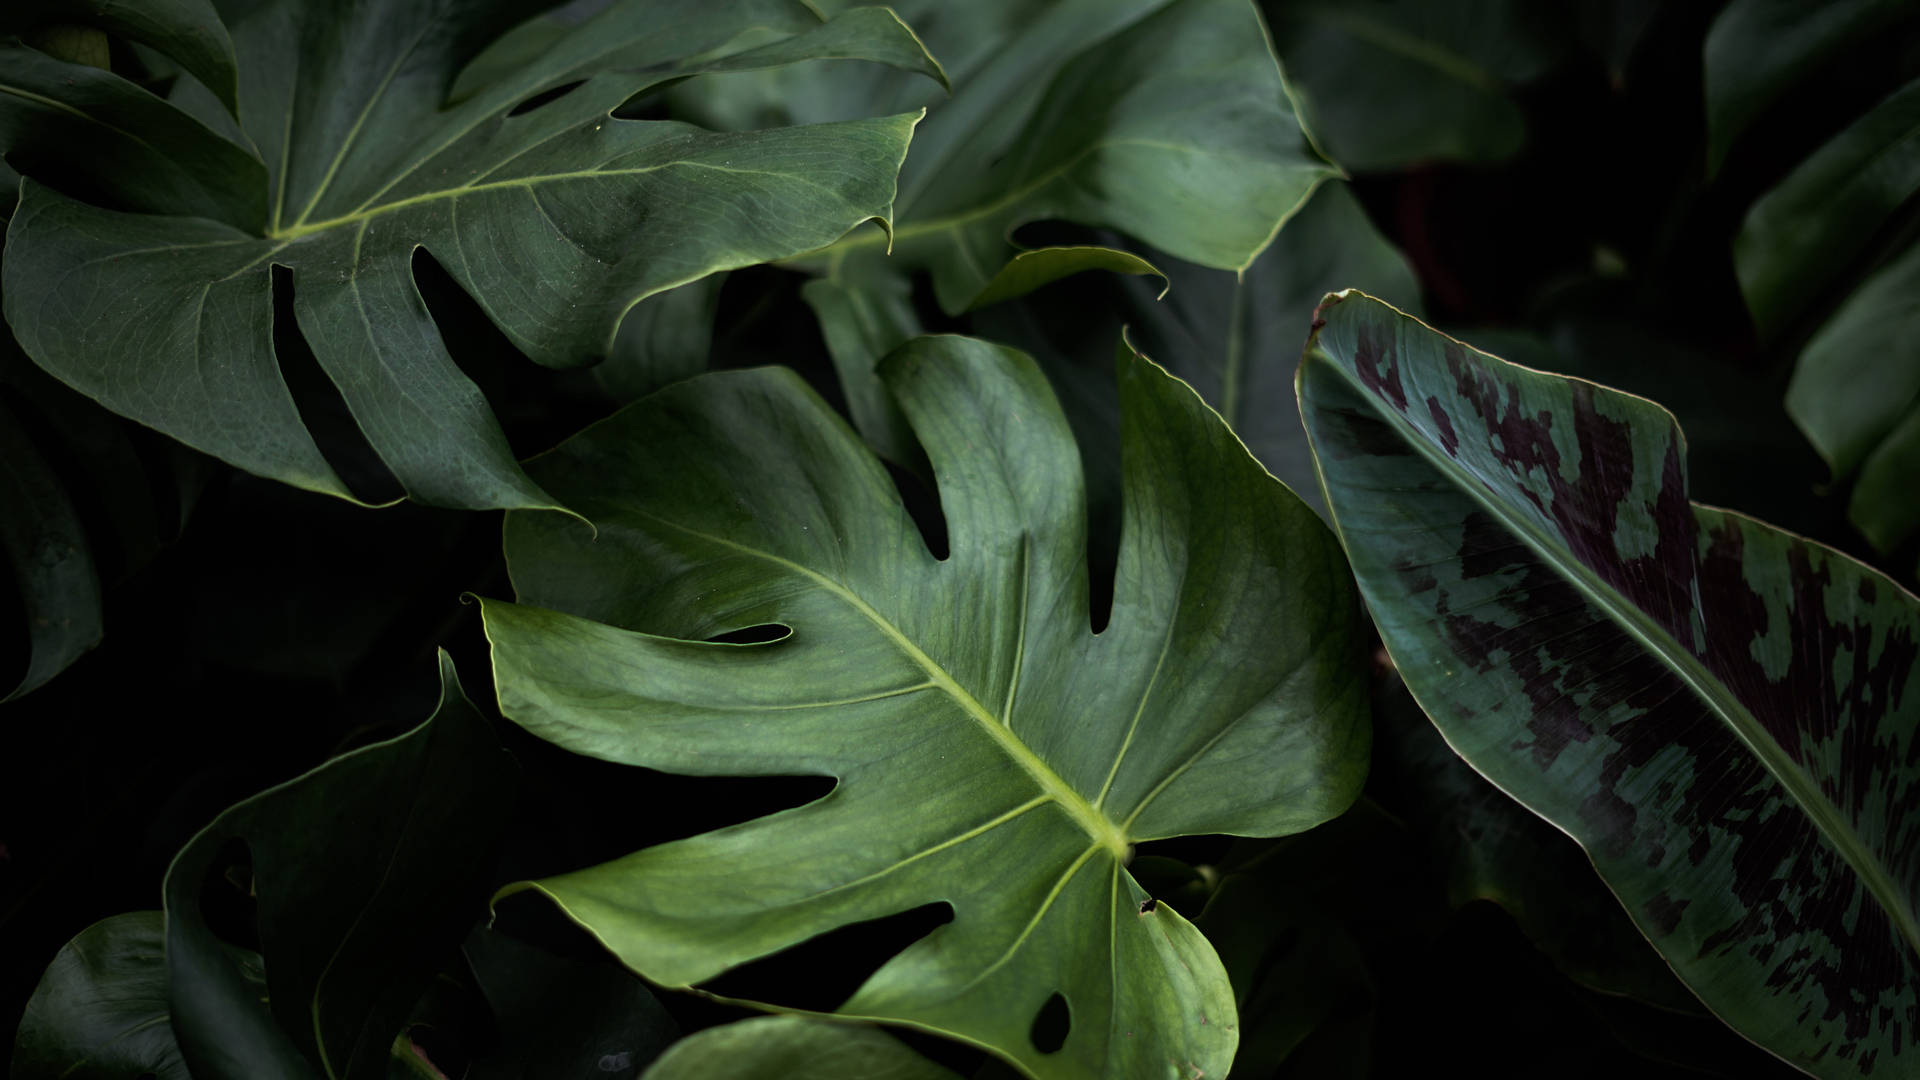 Free Plant 4k Wallpaper Downloads, [100+] Plant 4k Wallpapers for FREE |  